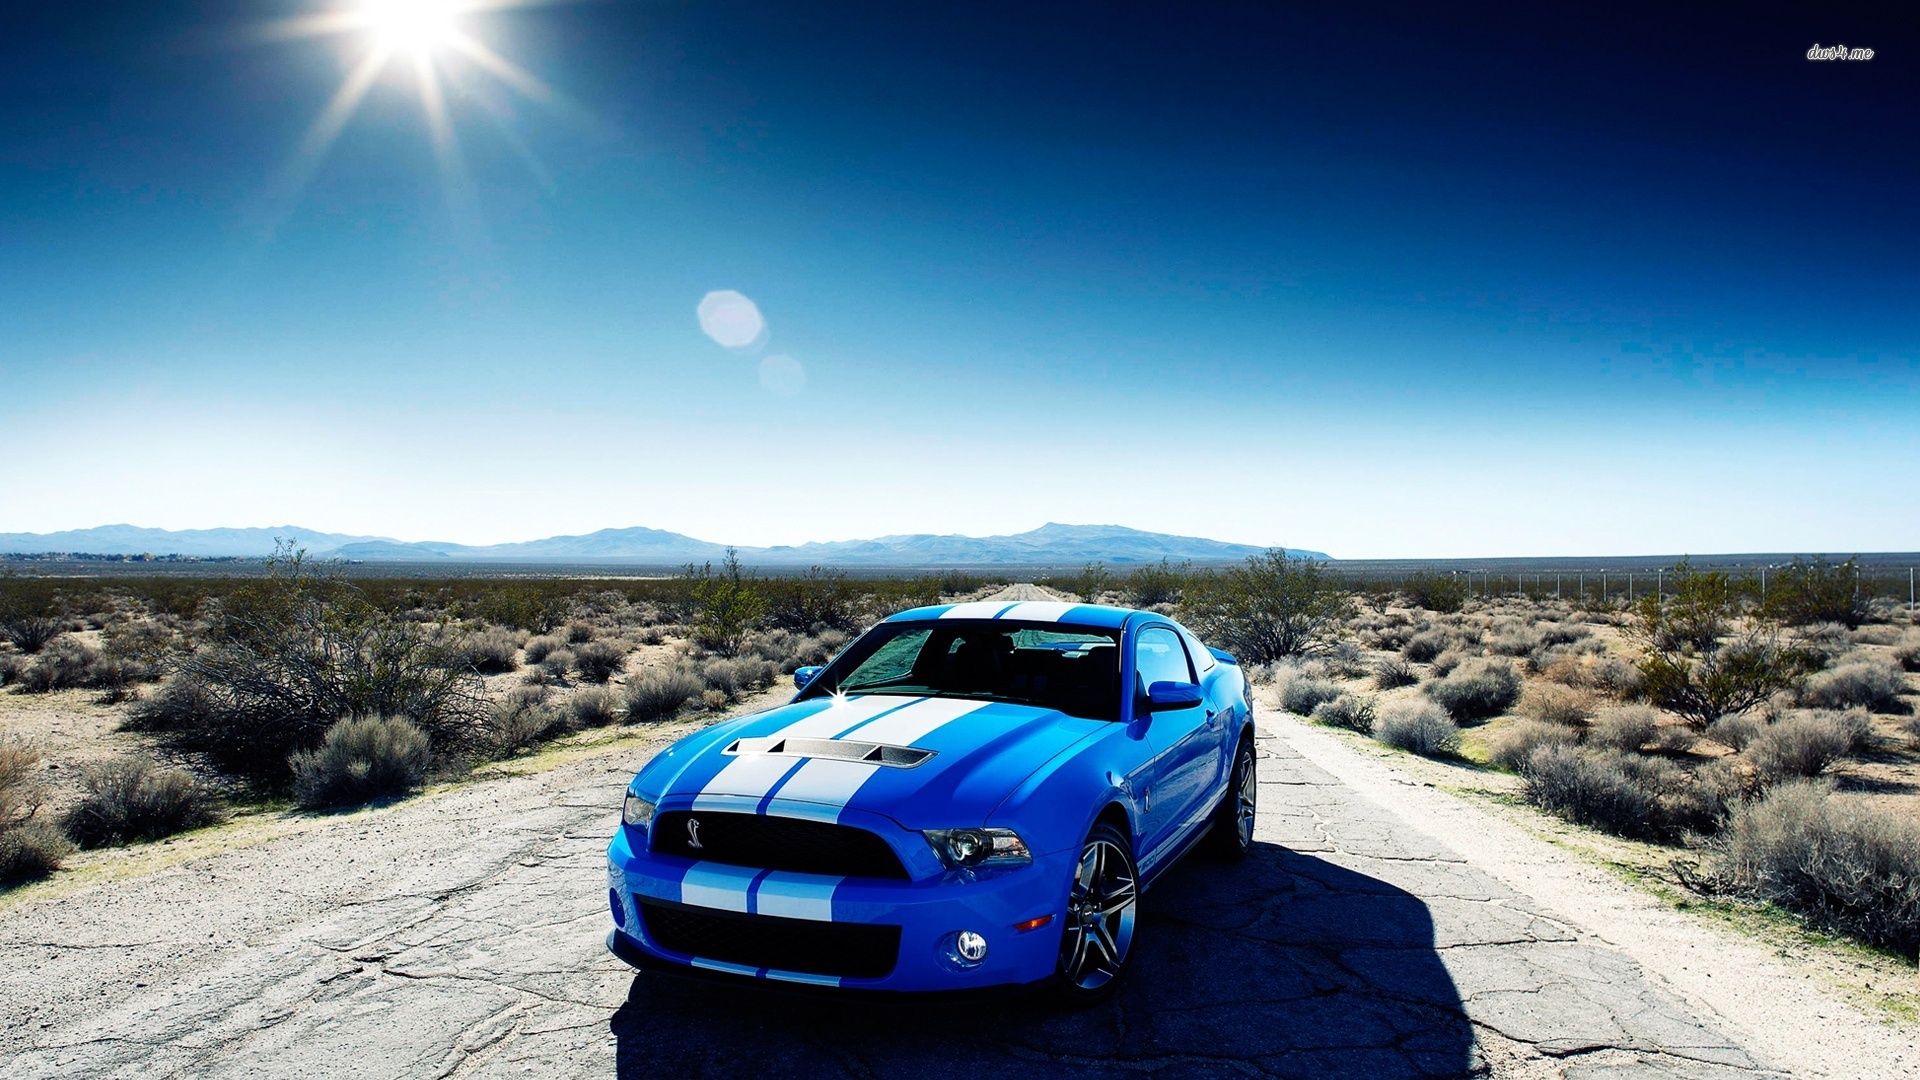 Gallery For Gt Mustang Shelby Gt500 Wallpaper